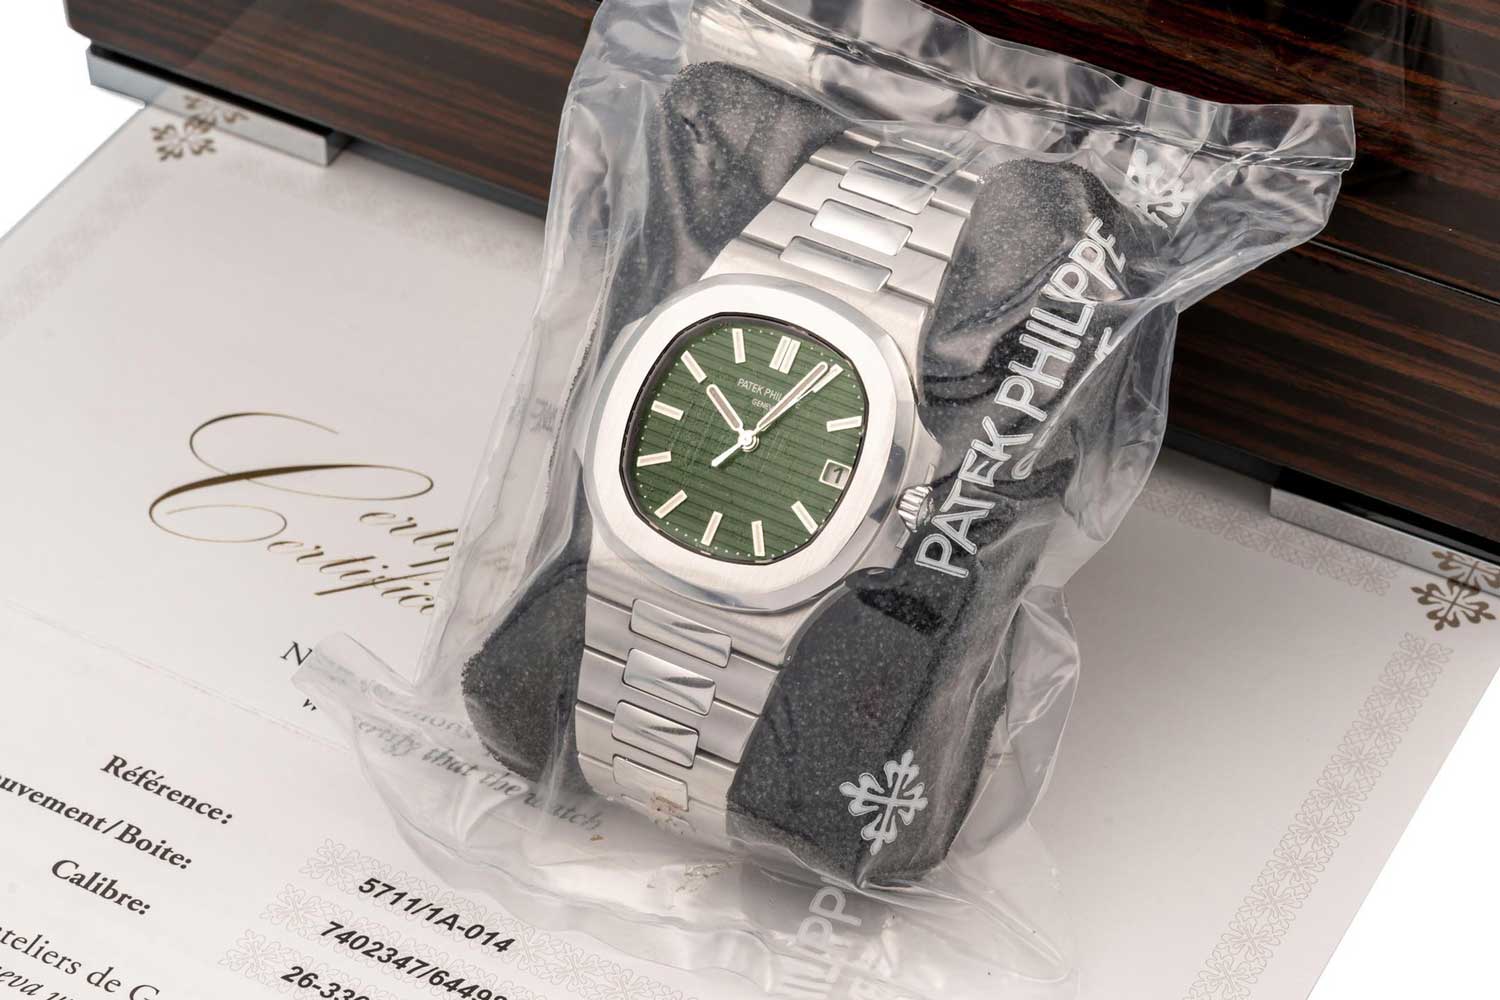 Patek Philippe, Ref. 5711/1A – 014 with “green dial” which was sold just a few weeks before being auctioned at Antiquorum in July 2021 (Image: Antiquorum)